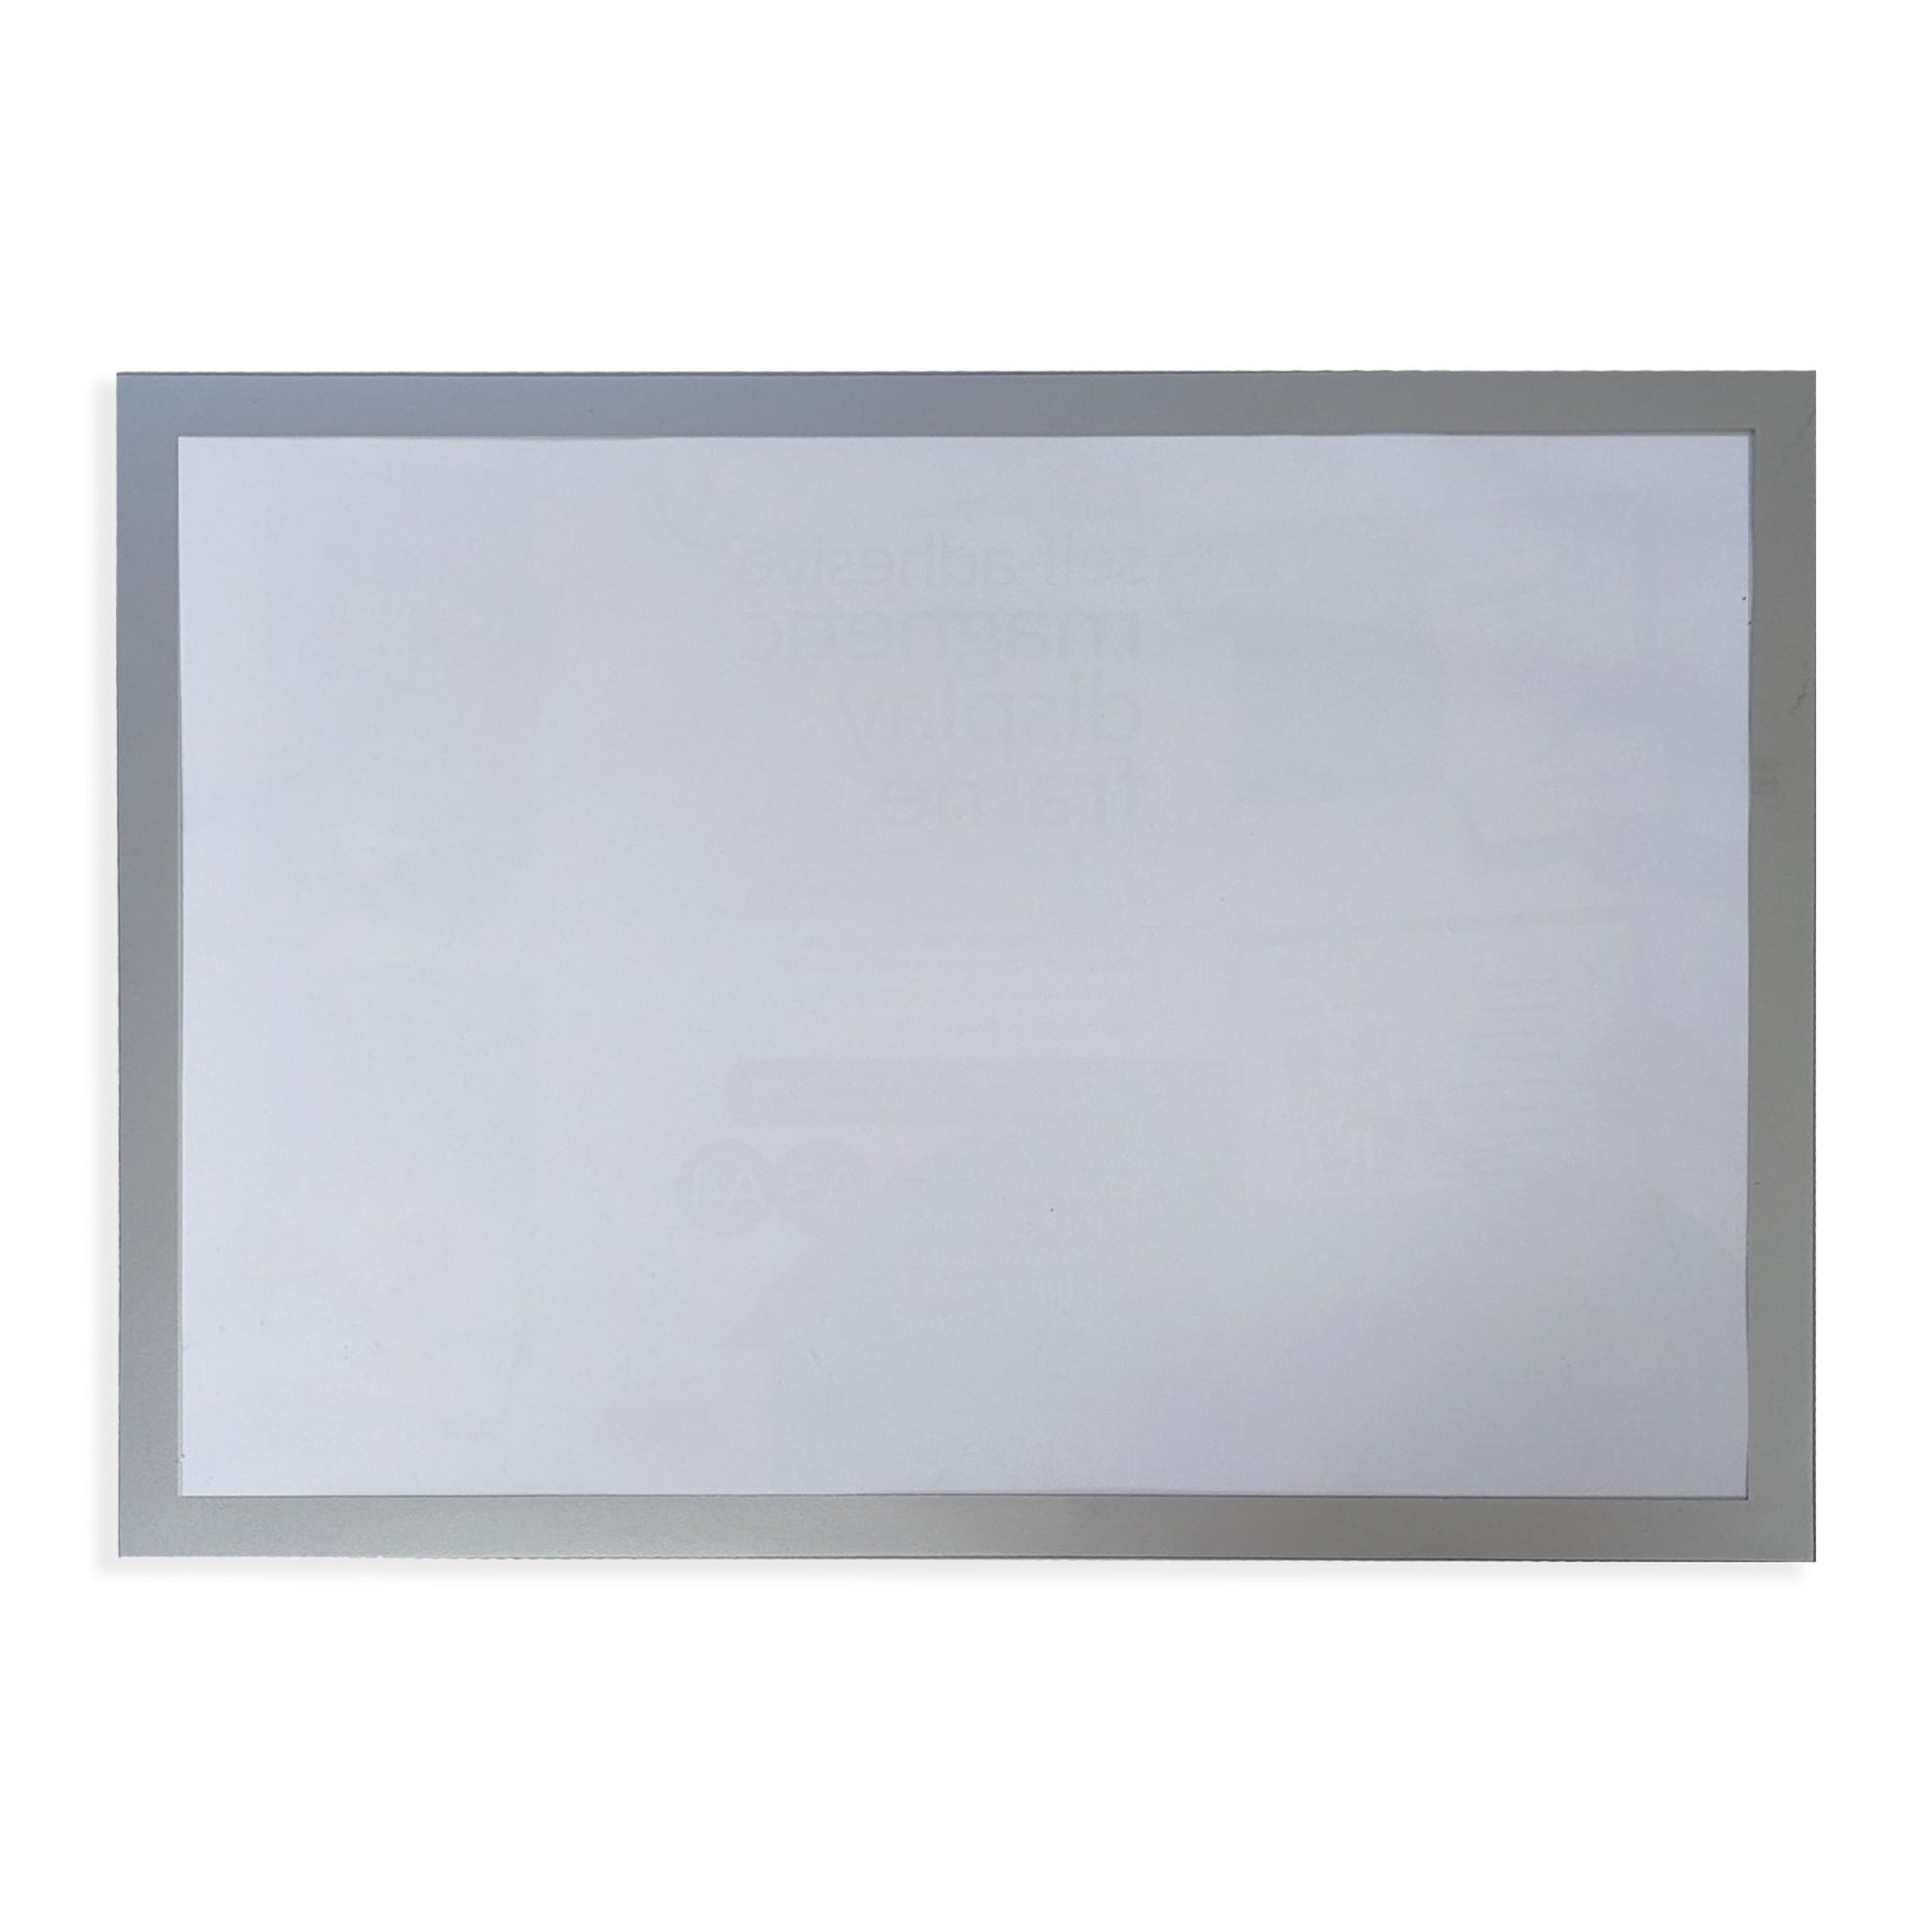 A clear A3 self-adhesive magnetic display frame with a silver border, empty and ready for custom inserts. The translucent quality of the surface allows for easy viewing of documents or signs placed within.